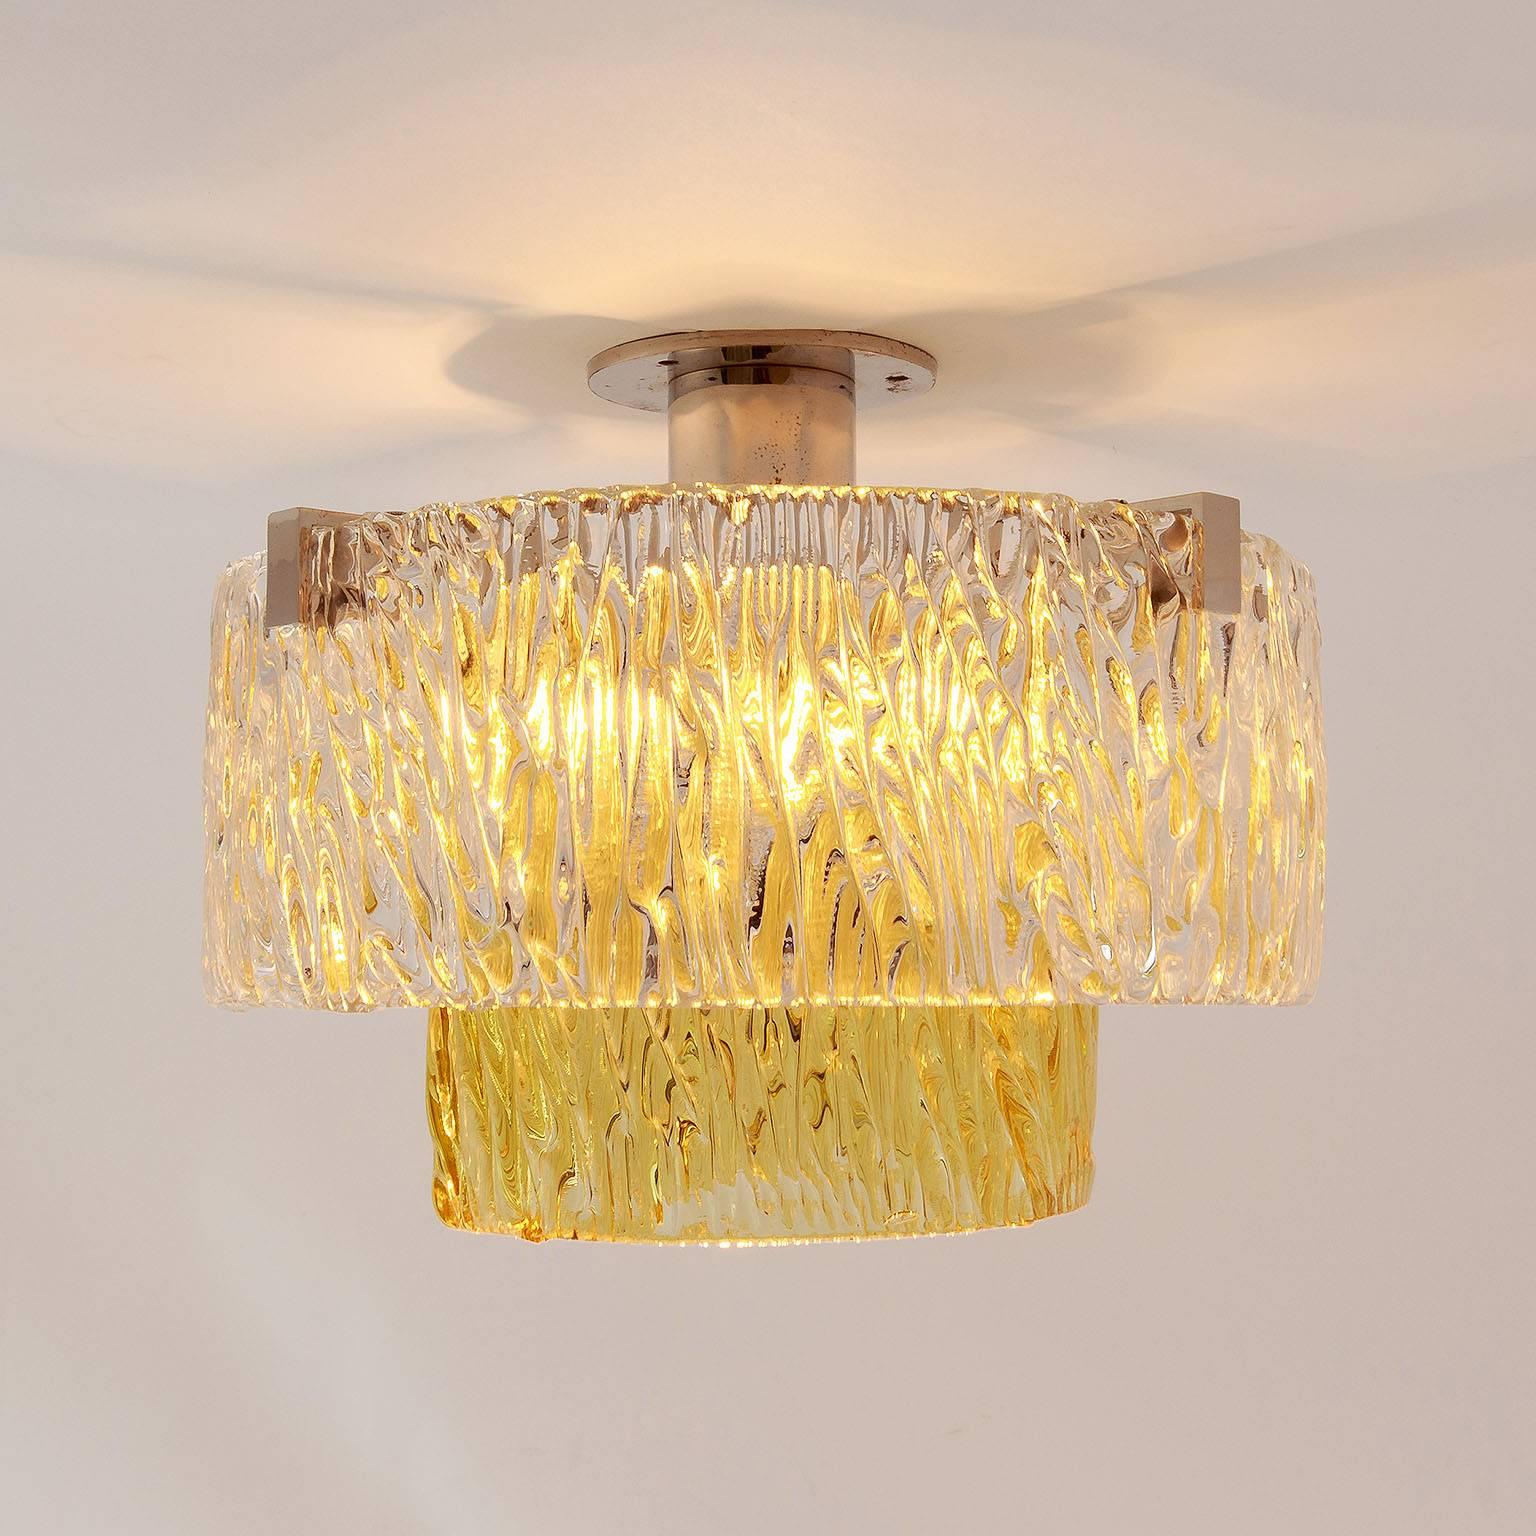 Mid-20th Century One of Two Kalmar Flush Mount Lights, Amber Tone Glass and Nickel, 1960s